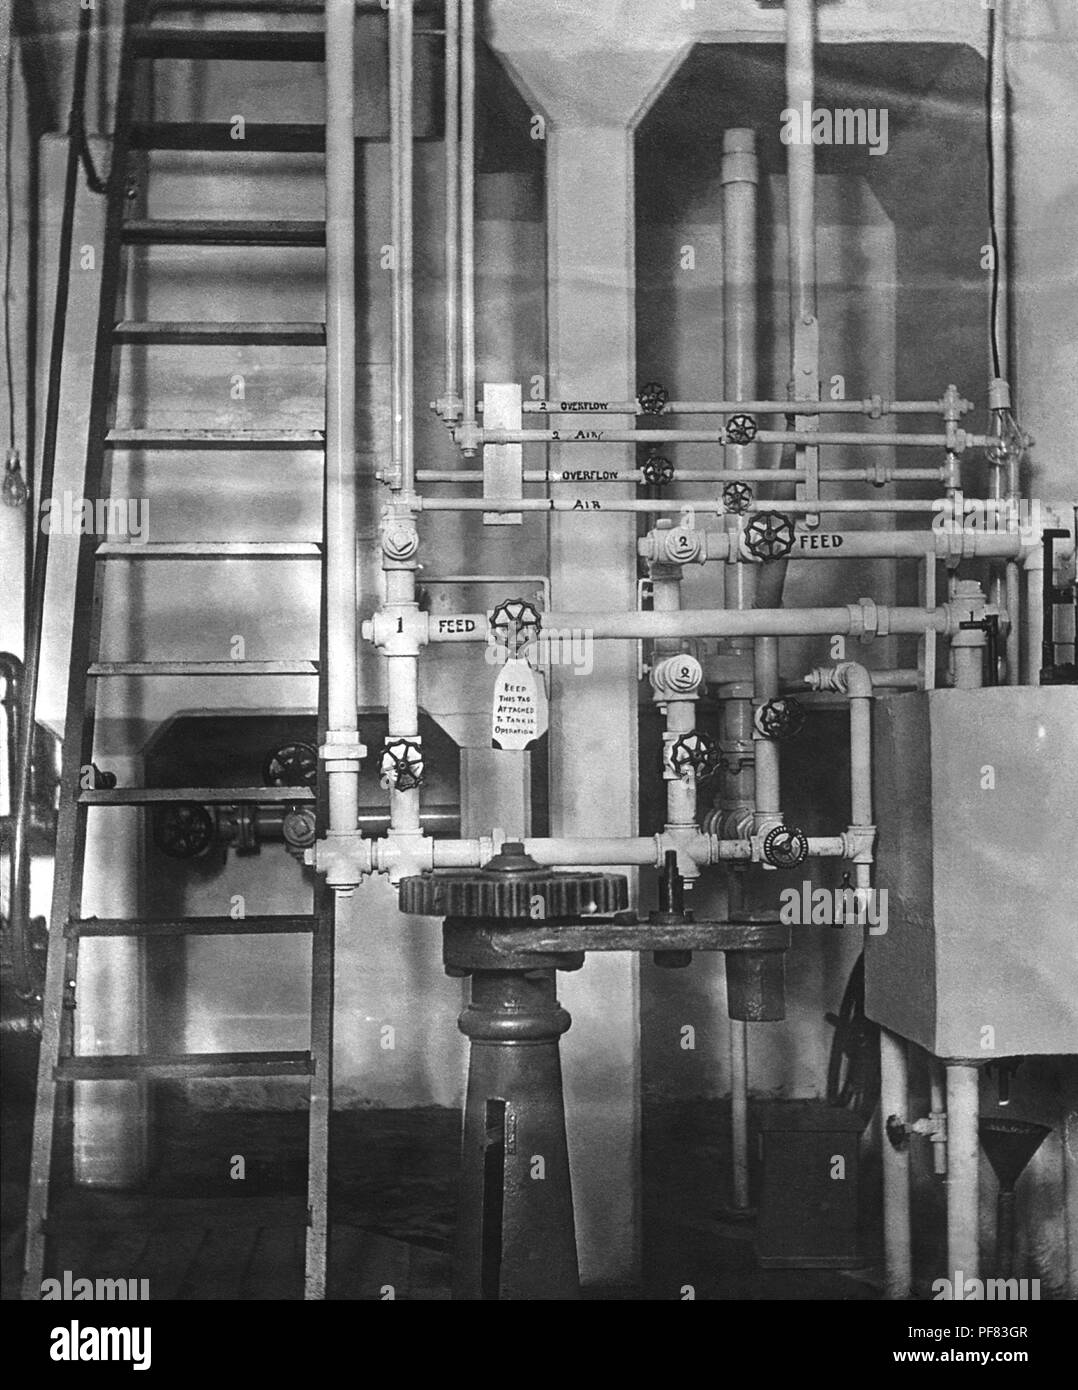 Piping and the control box machinery inside of a hypochlorite plant located in Duluth, Minnesota, 1913. Image courtesy Centers for Disease Control (CDC) / Minnesota Department of Health, R.N. Barr Library, Librarians Melissa Rethlefsen and Marie Jones. () Stock Photo